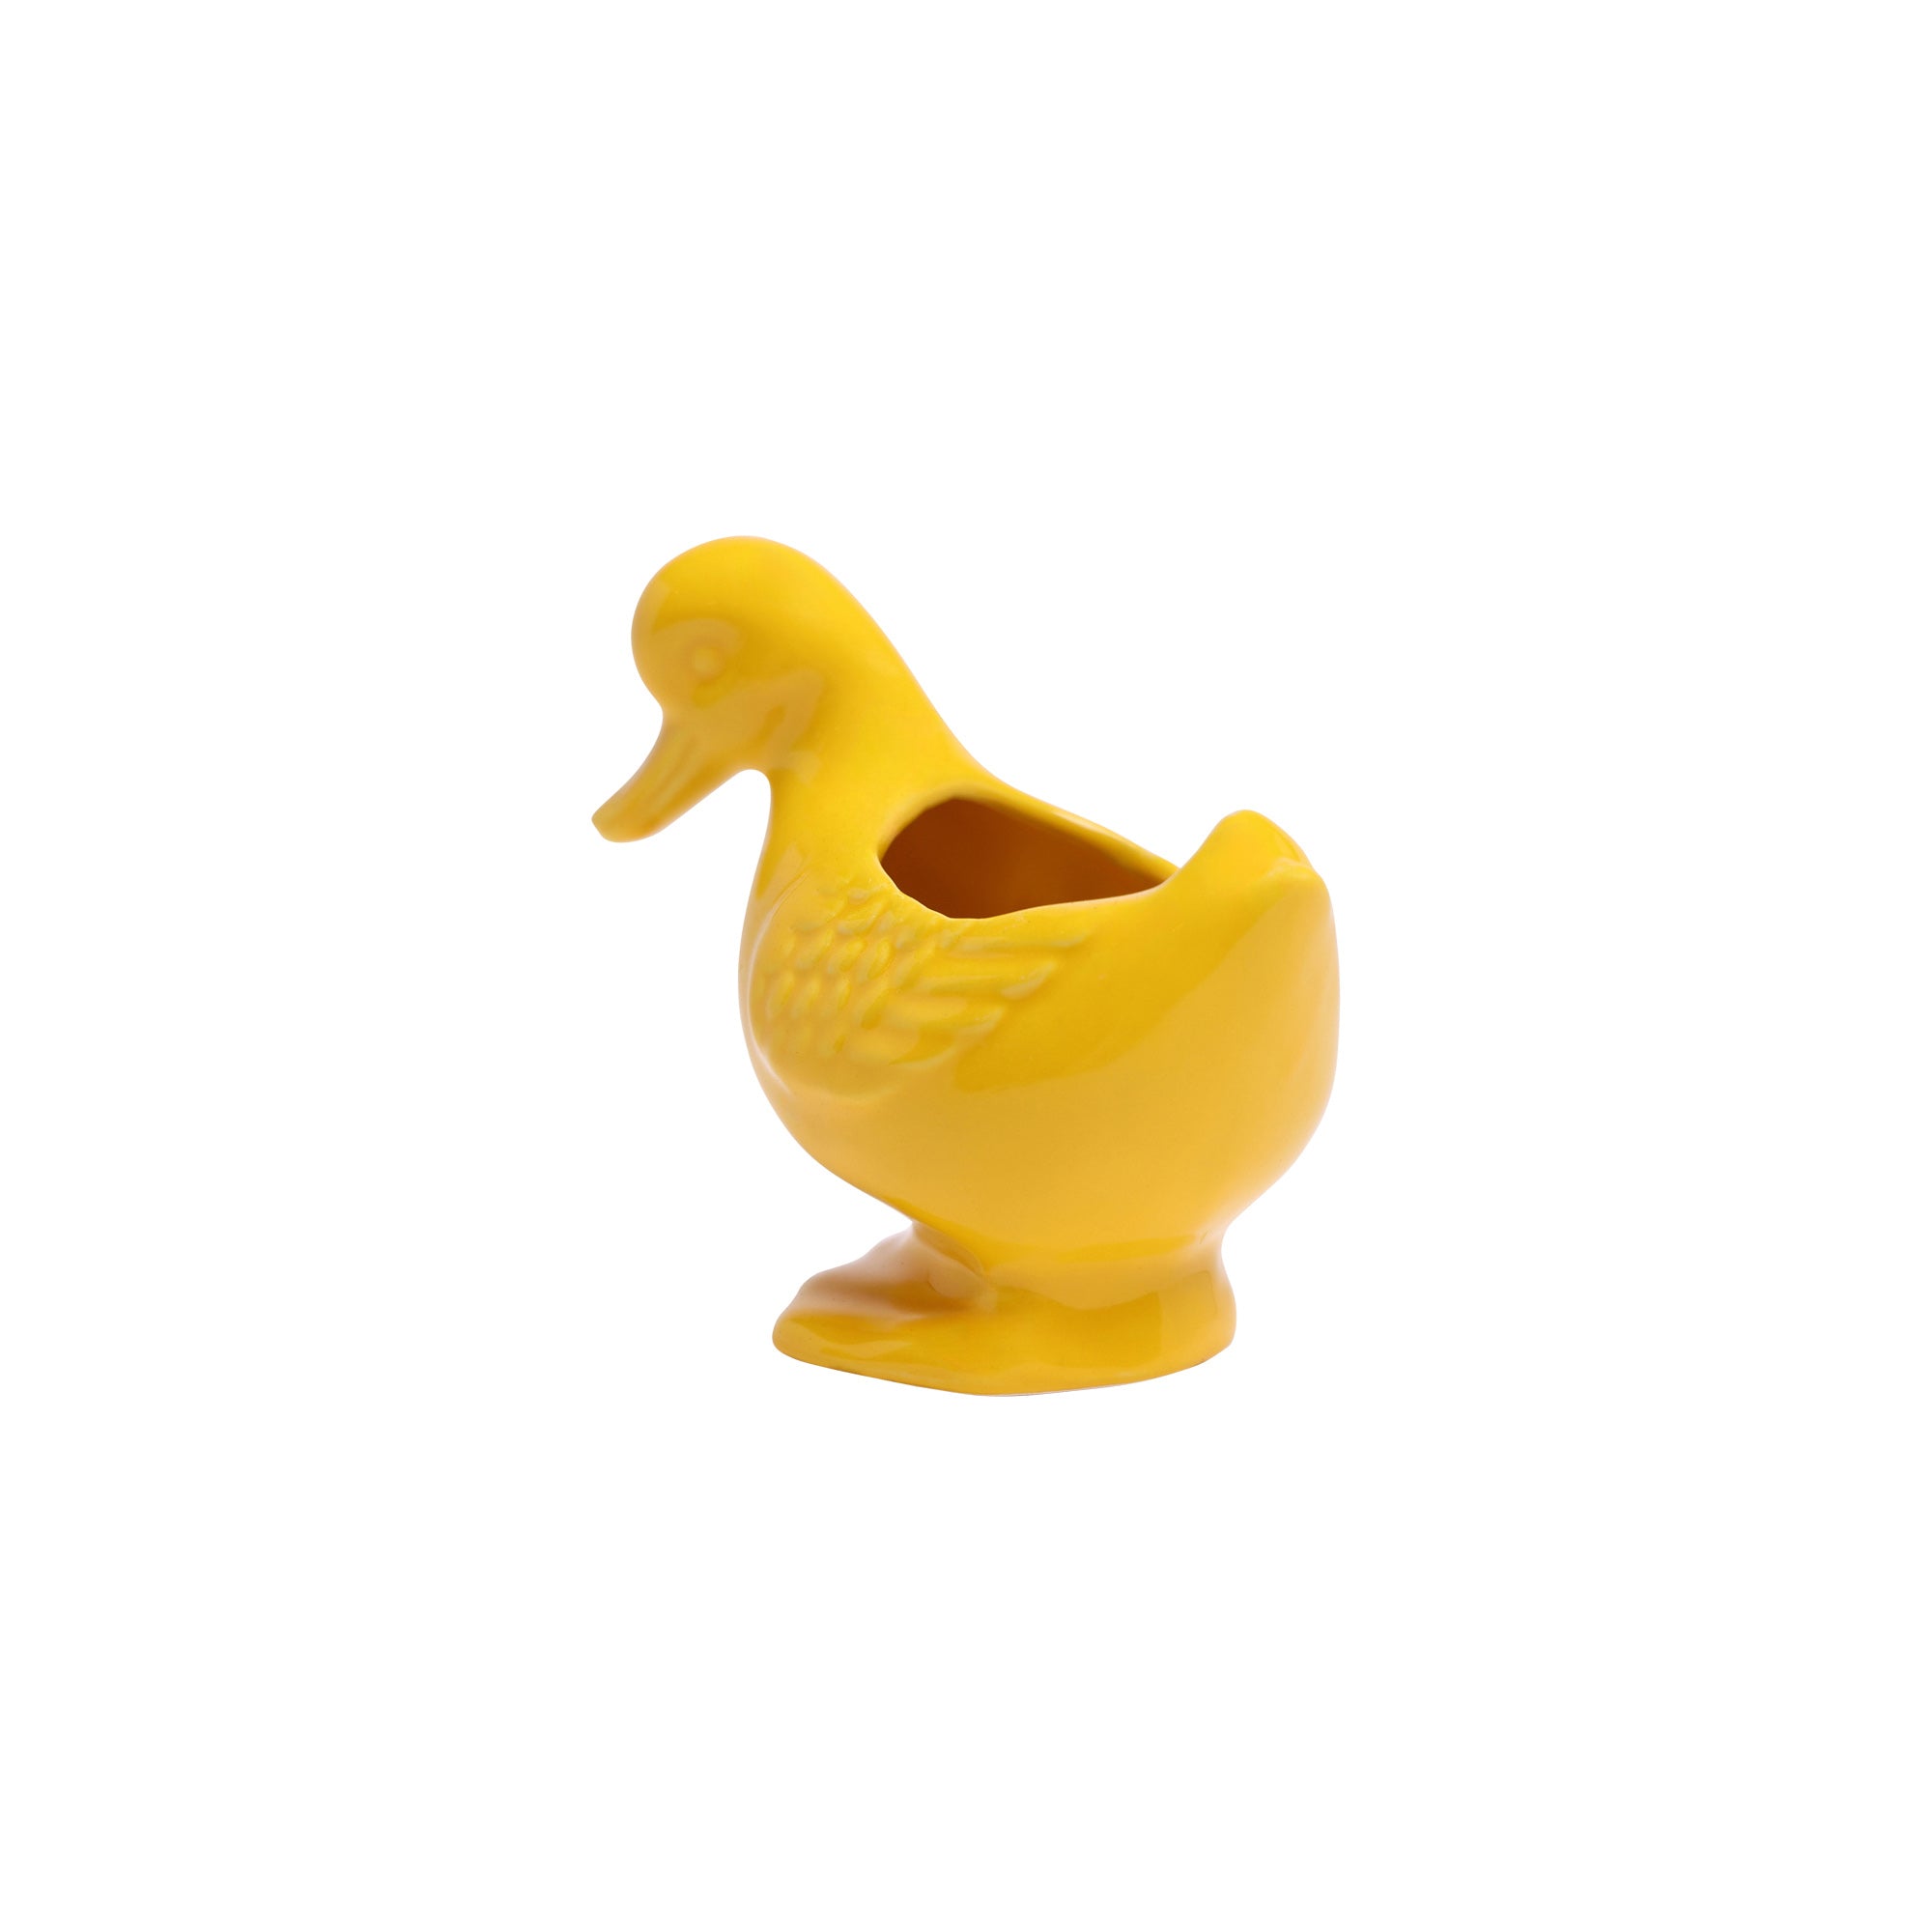 A bright yellow plastic **Duck Ceramic Indoor Plant Pot for Succulents** with a split back design, positioned upright, isolated on a white background.